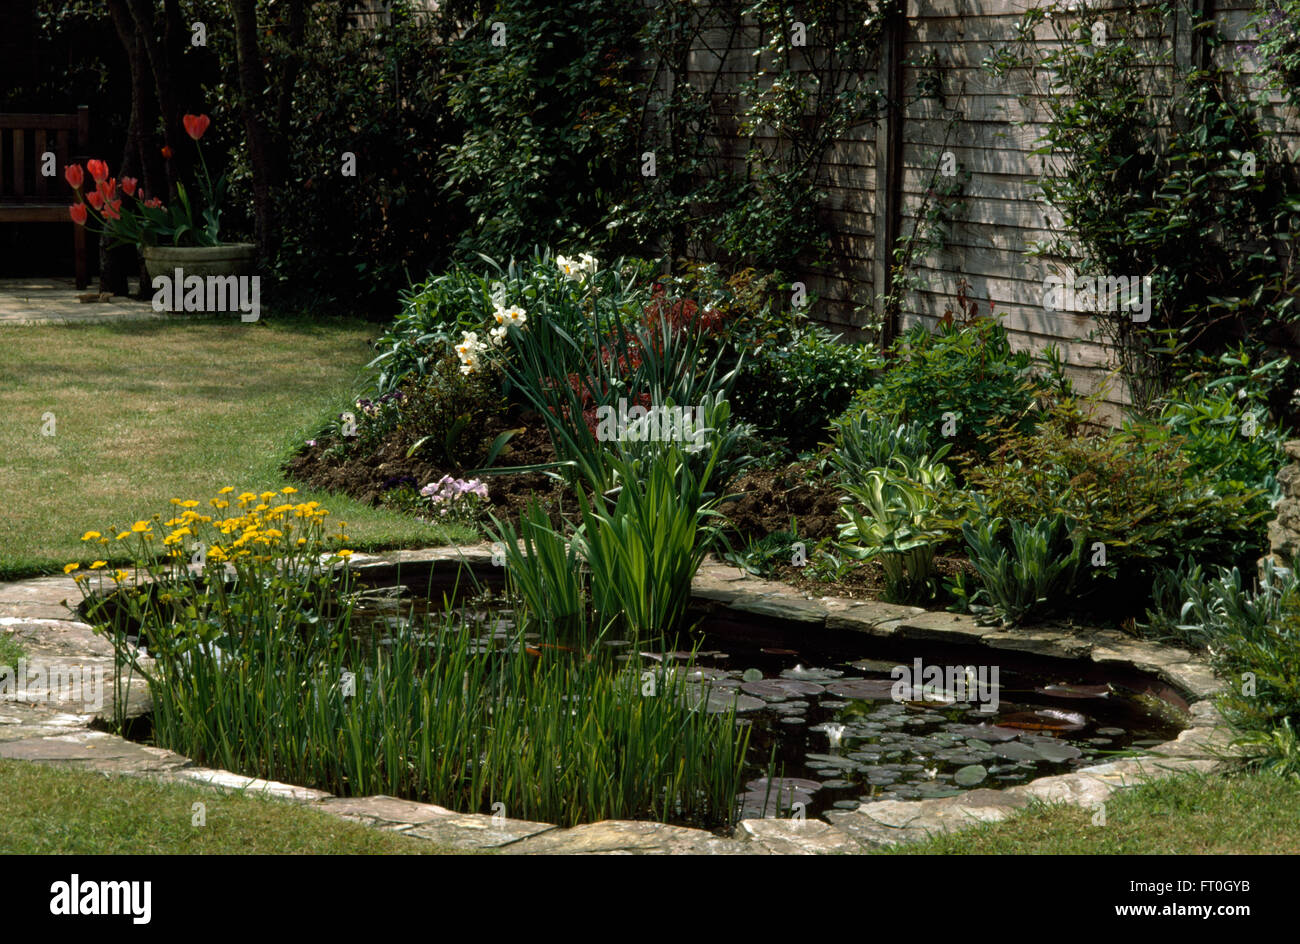 Stone paved edging around a curved pond with yellow kingcups in a town garden Stock Photo